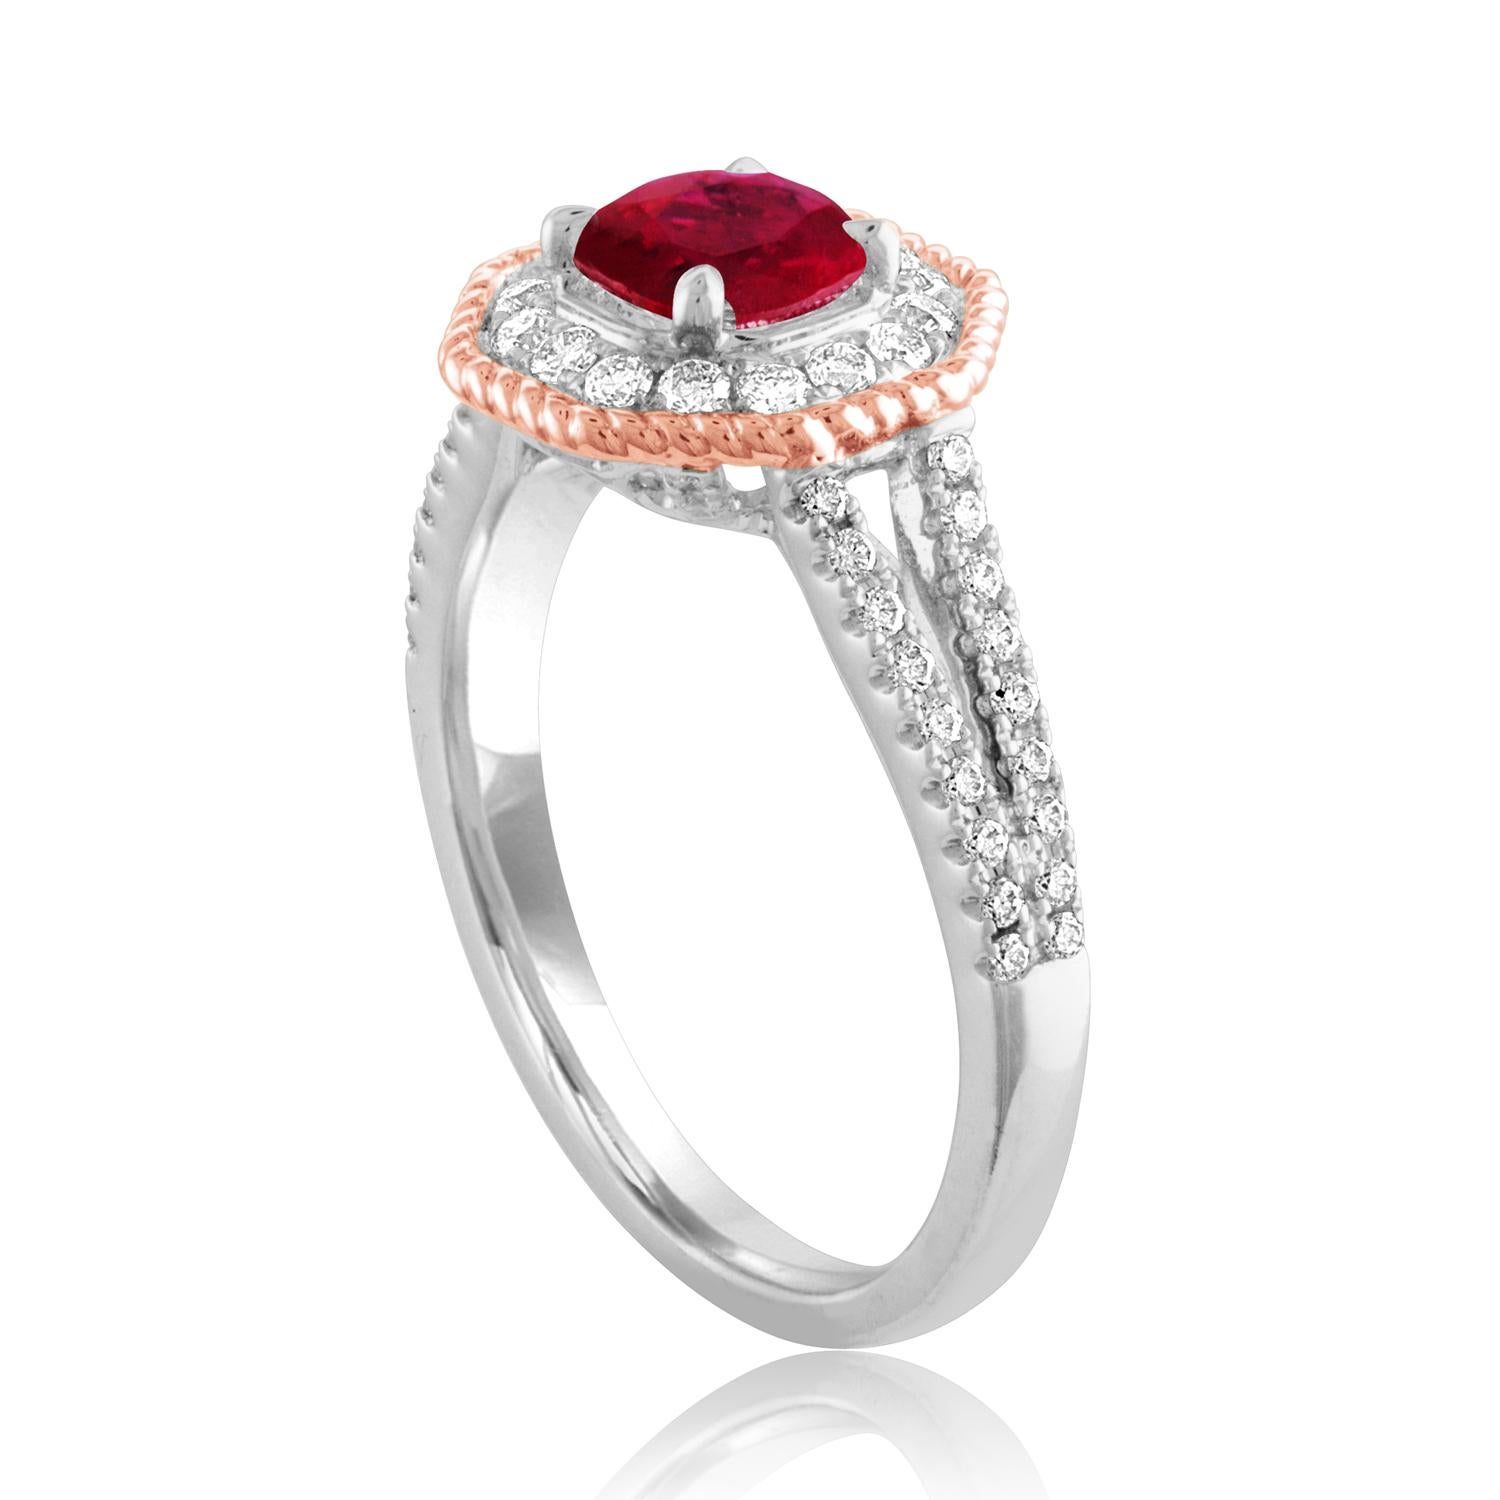 Beautiful Octagon Halo Two Tone Ring
The ring is 18K White & Rose Gold
The Center Stone is a Round Ruby 1.05 Carats
The Ruby is AGL Certified Heated
There are 0.68 Carats in Diamonds F/G VS/SI
The ring is a size 6.5, sizable.
The ring weighs 4.7